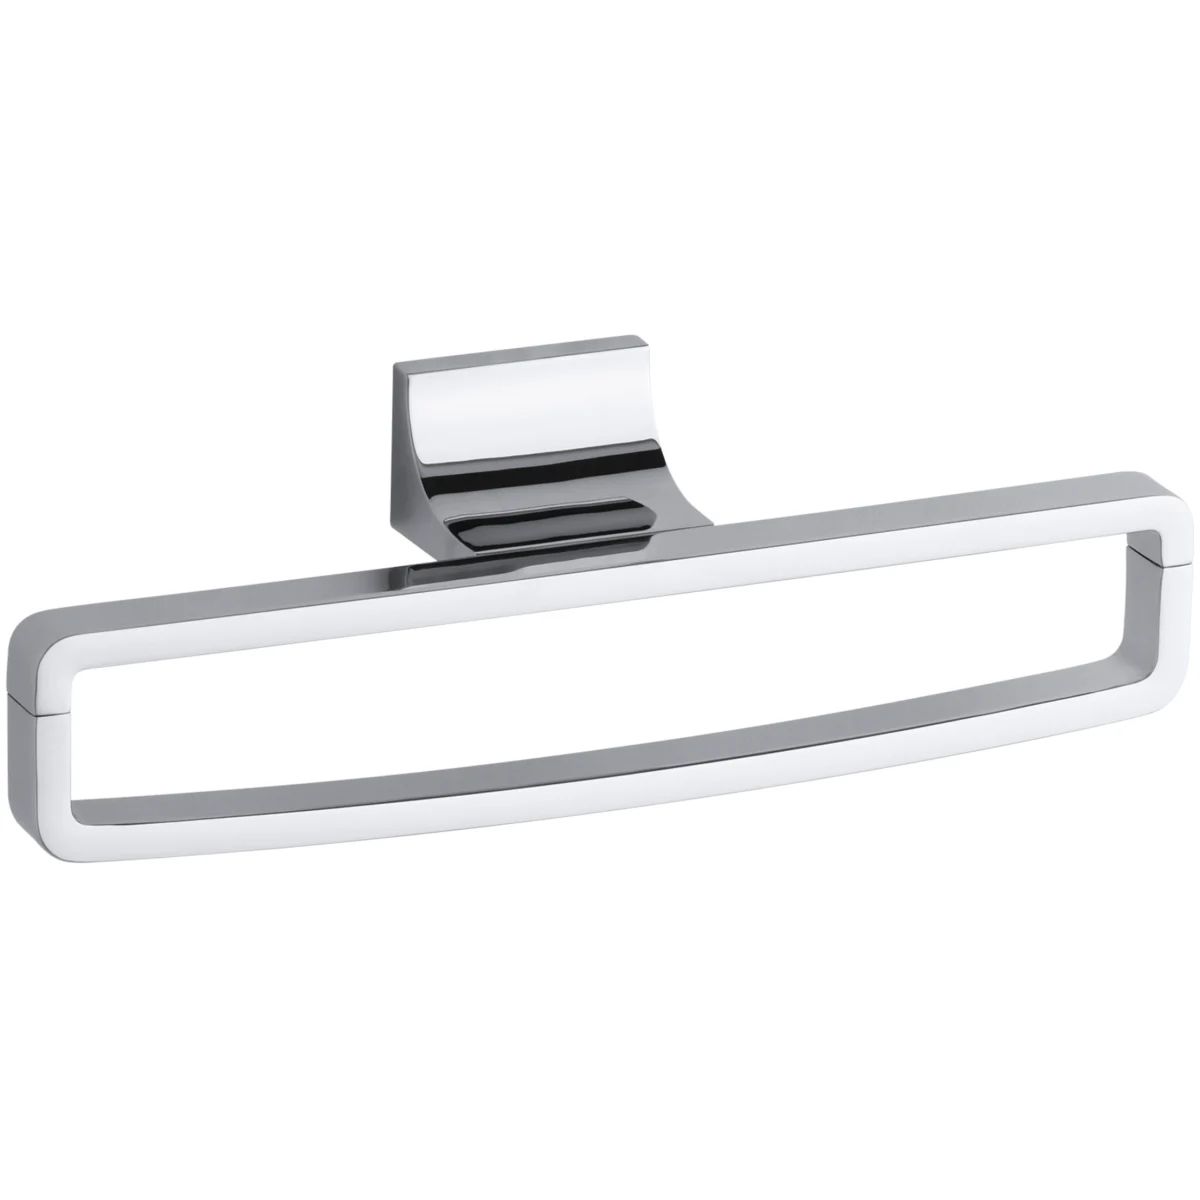 Modern Unique Towel Ring from Loure Collection | Build.com, Inc.